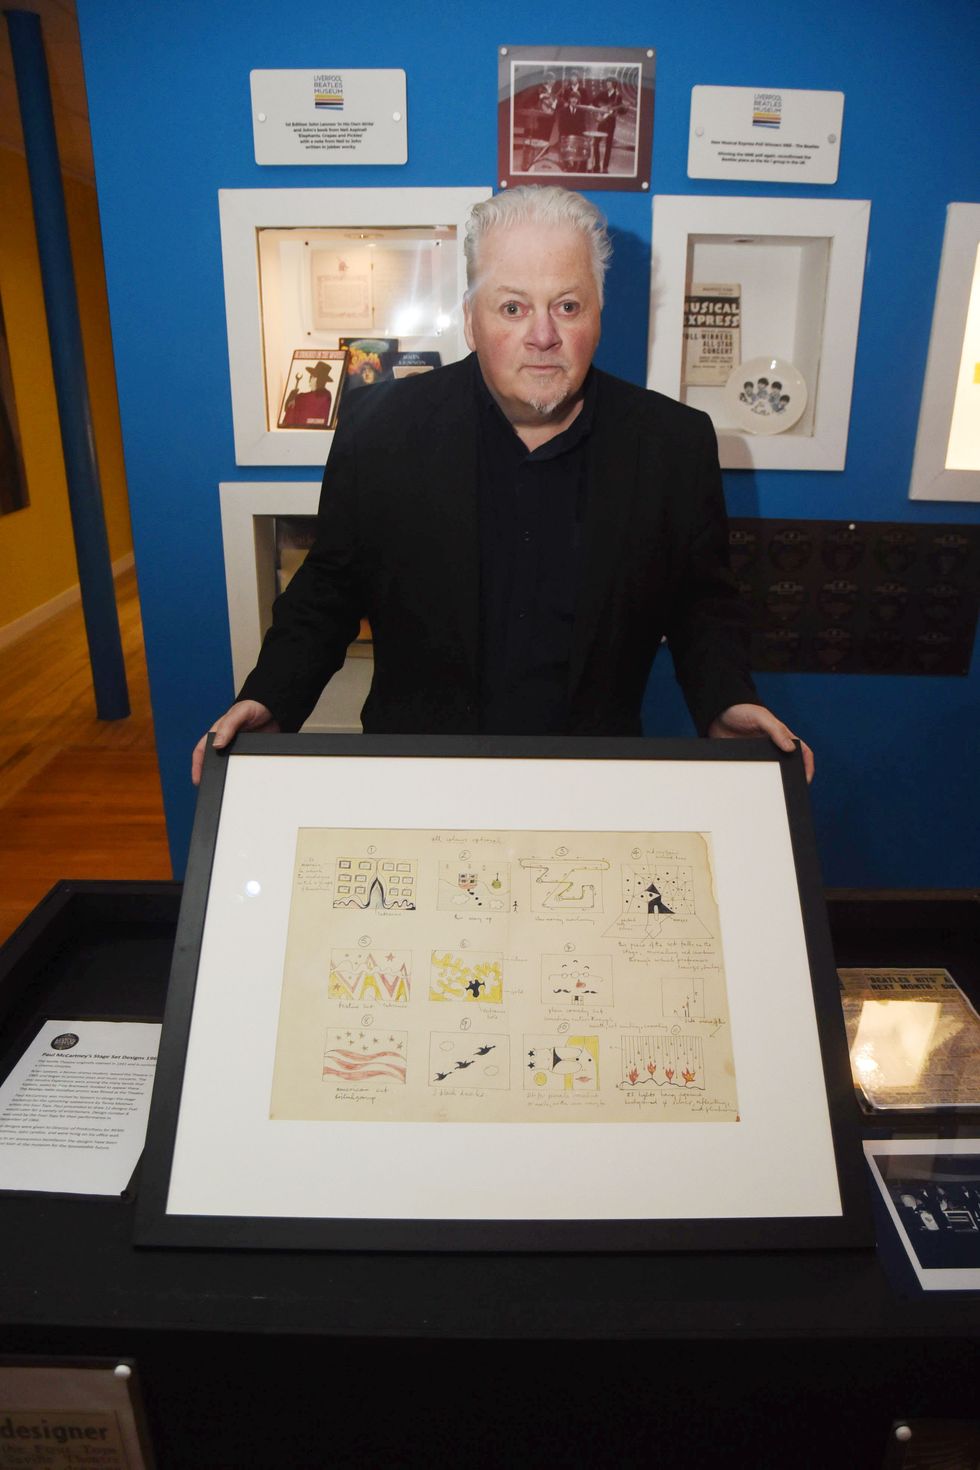 Stage backdrop designs drawn by Sir Paul McCartney unveiled at museum